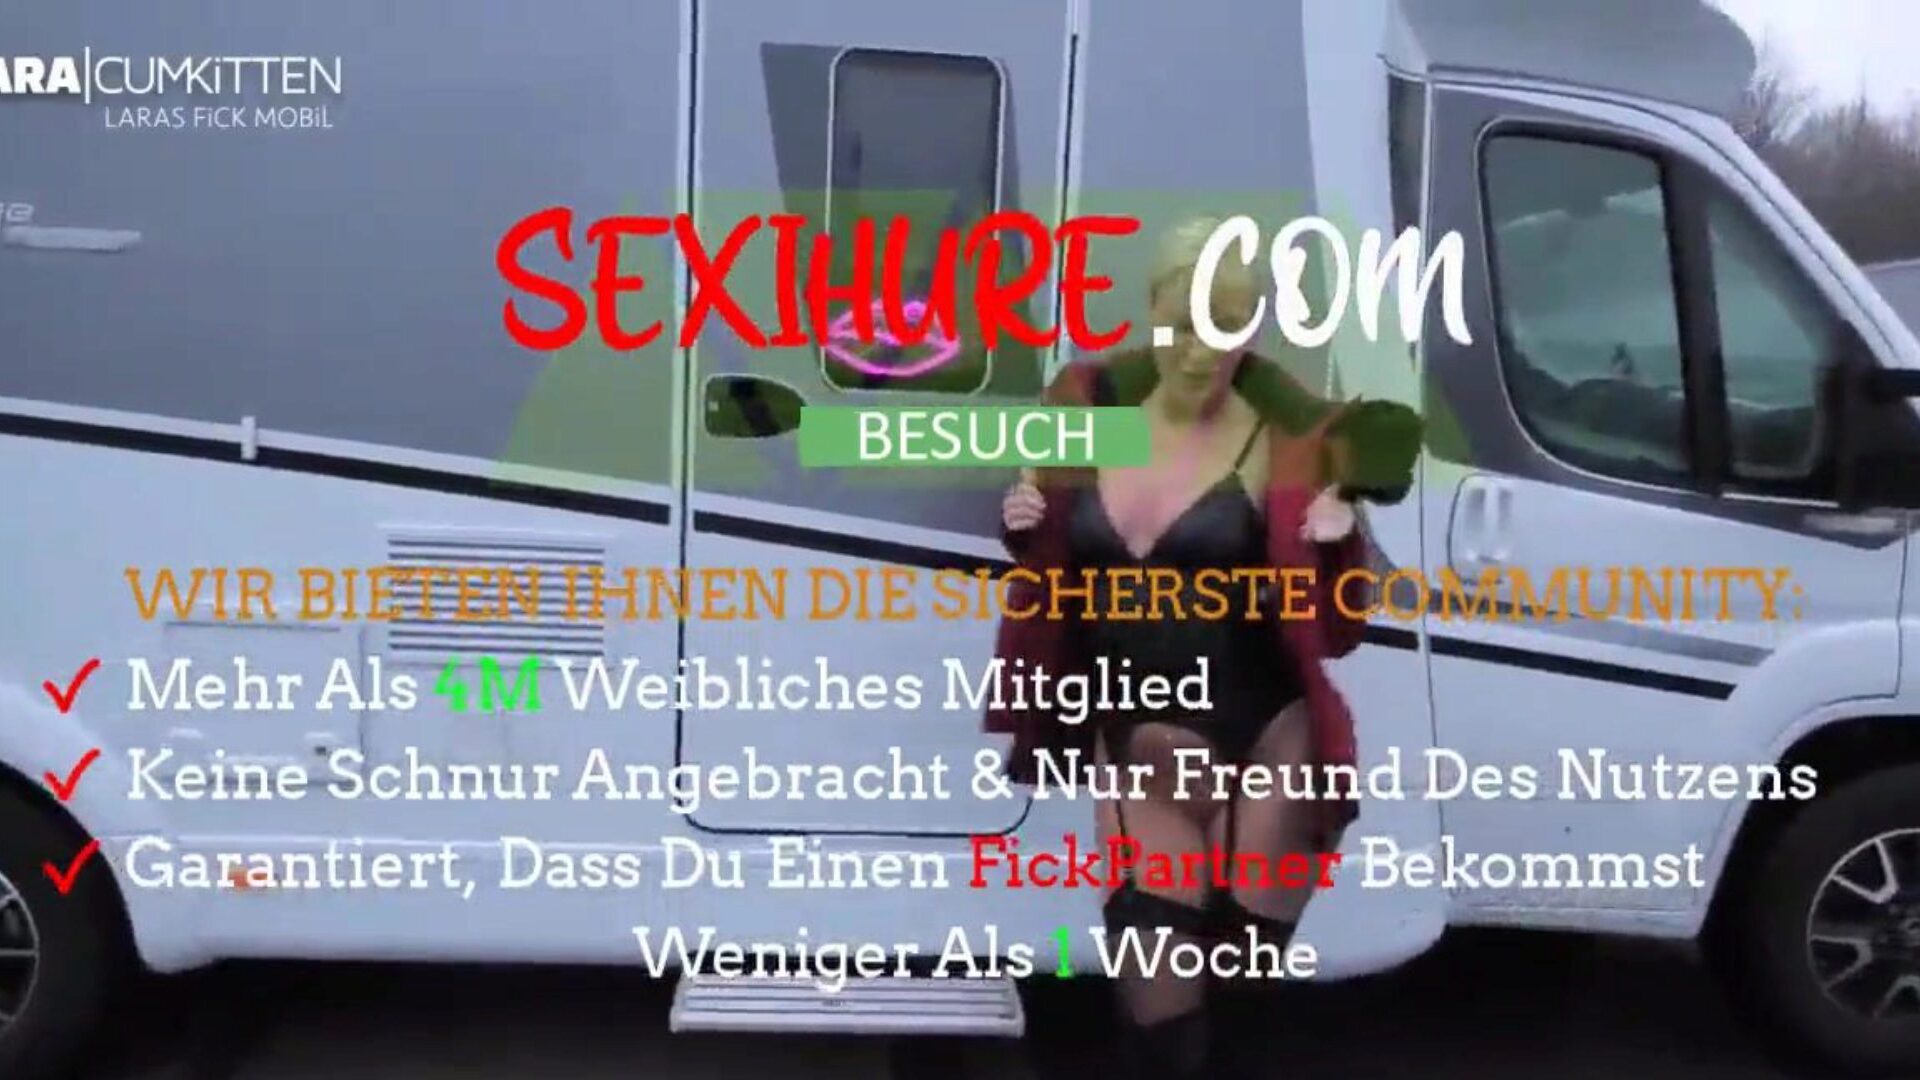 besuch mich in meinem fickmobil hobbyhure im ... watch besuch mich in meinem fickmobil hobbyhure im industriegebiet film on xhamster - the ultimate archive of free german german sex hd pornography tube clips